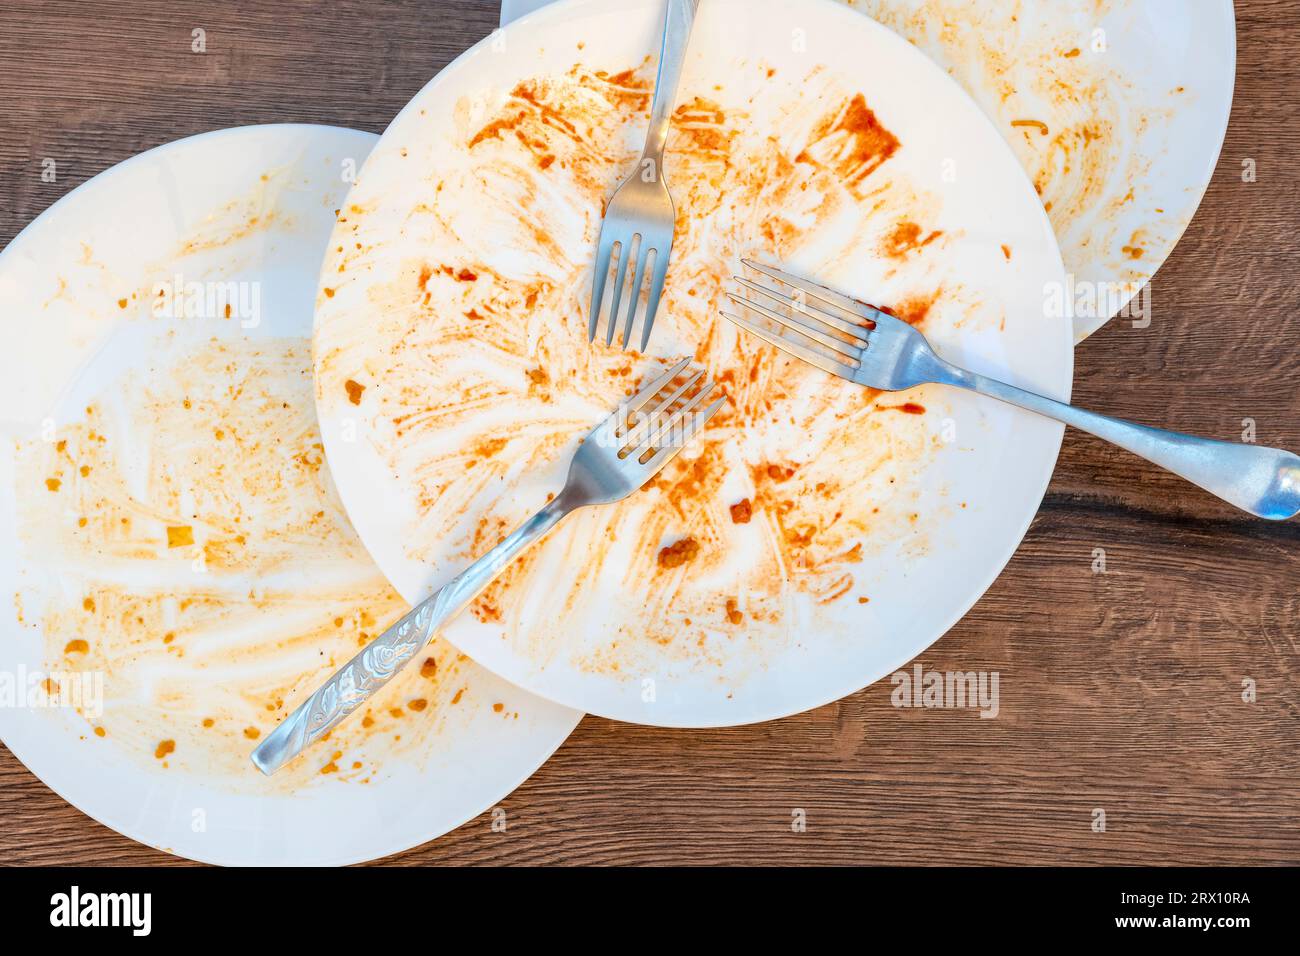 dirty plates, forks, cutlery after eating. Dirty dishes after eating. End of meal. Good appetite, delicious food and dish concept. top view Stock Photo